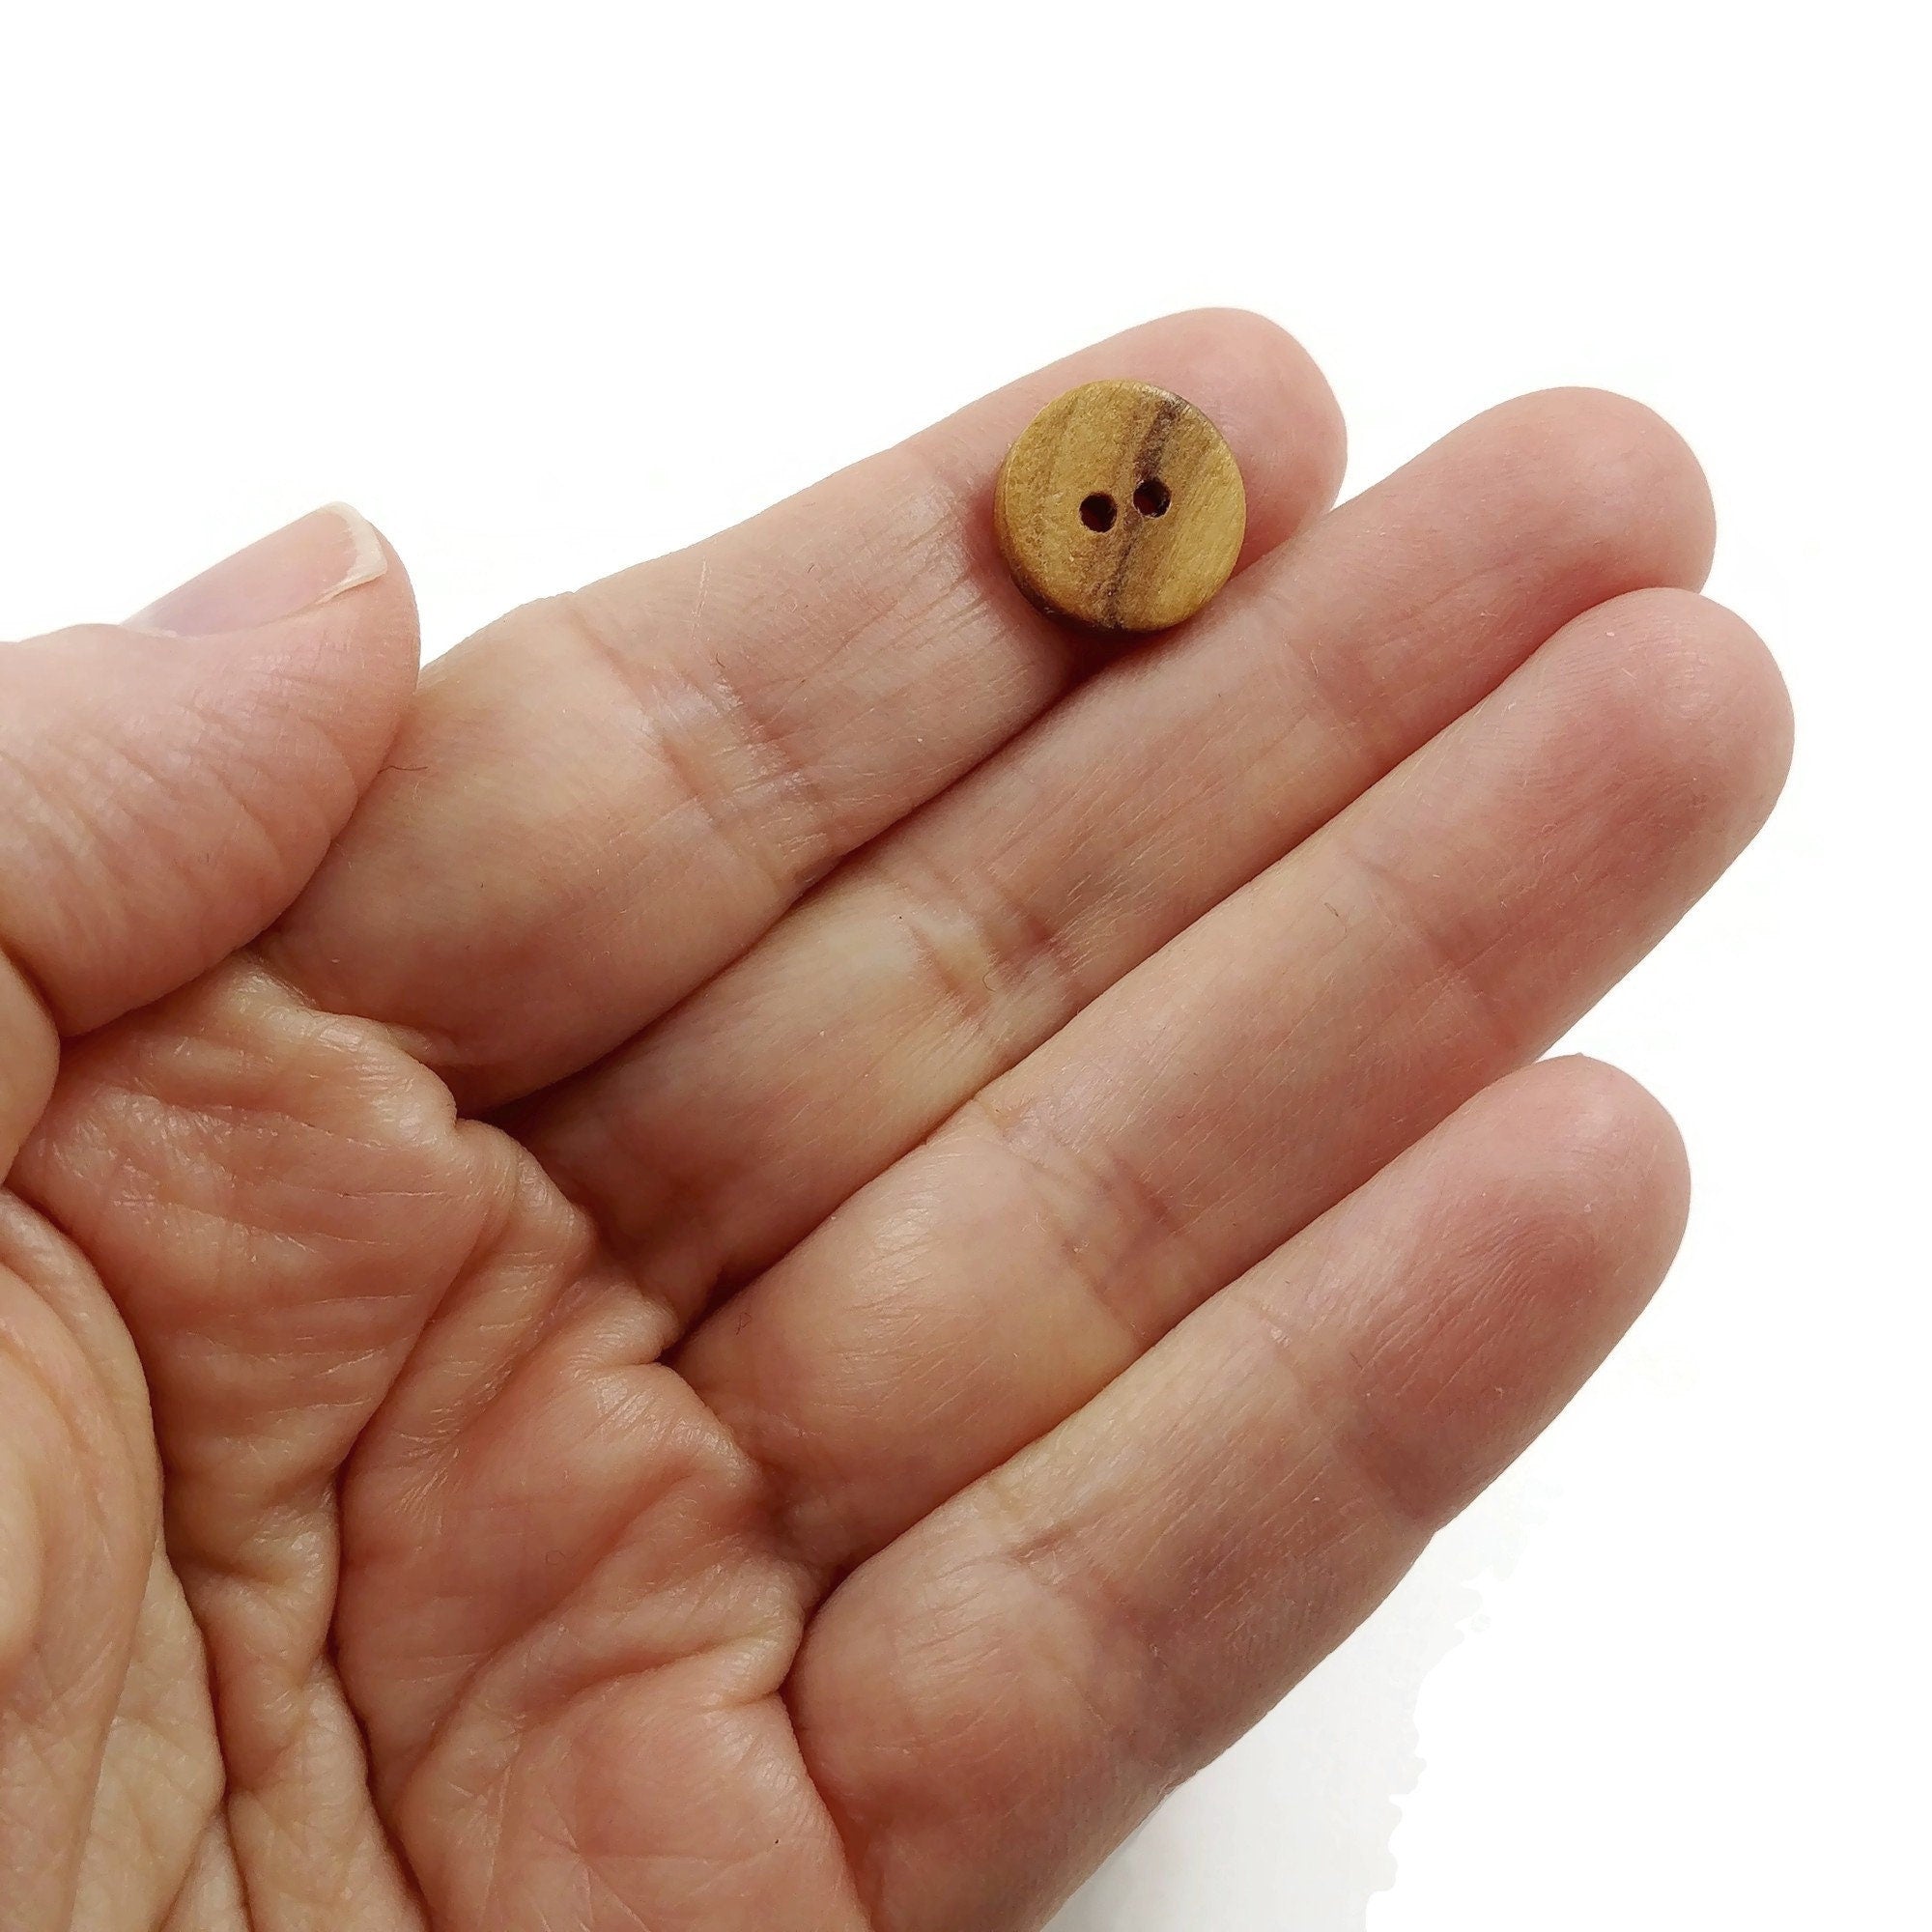 Natural olive wood buttons, 11mm, 13mm, 15mm, 20mm, 25mm, Wooden sewing buttons, Made in Italy